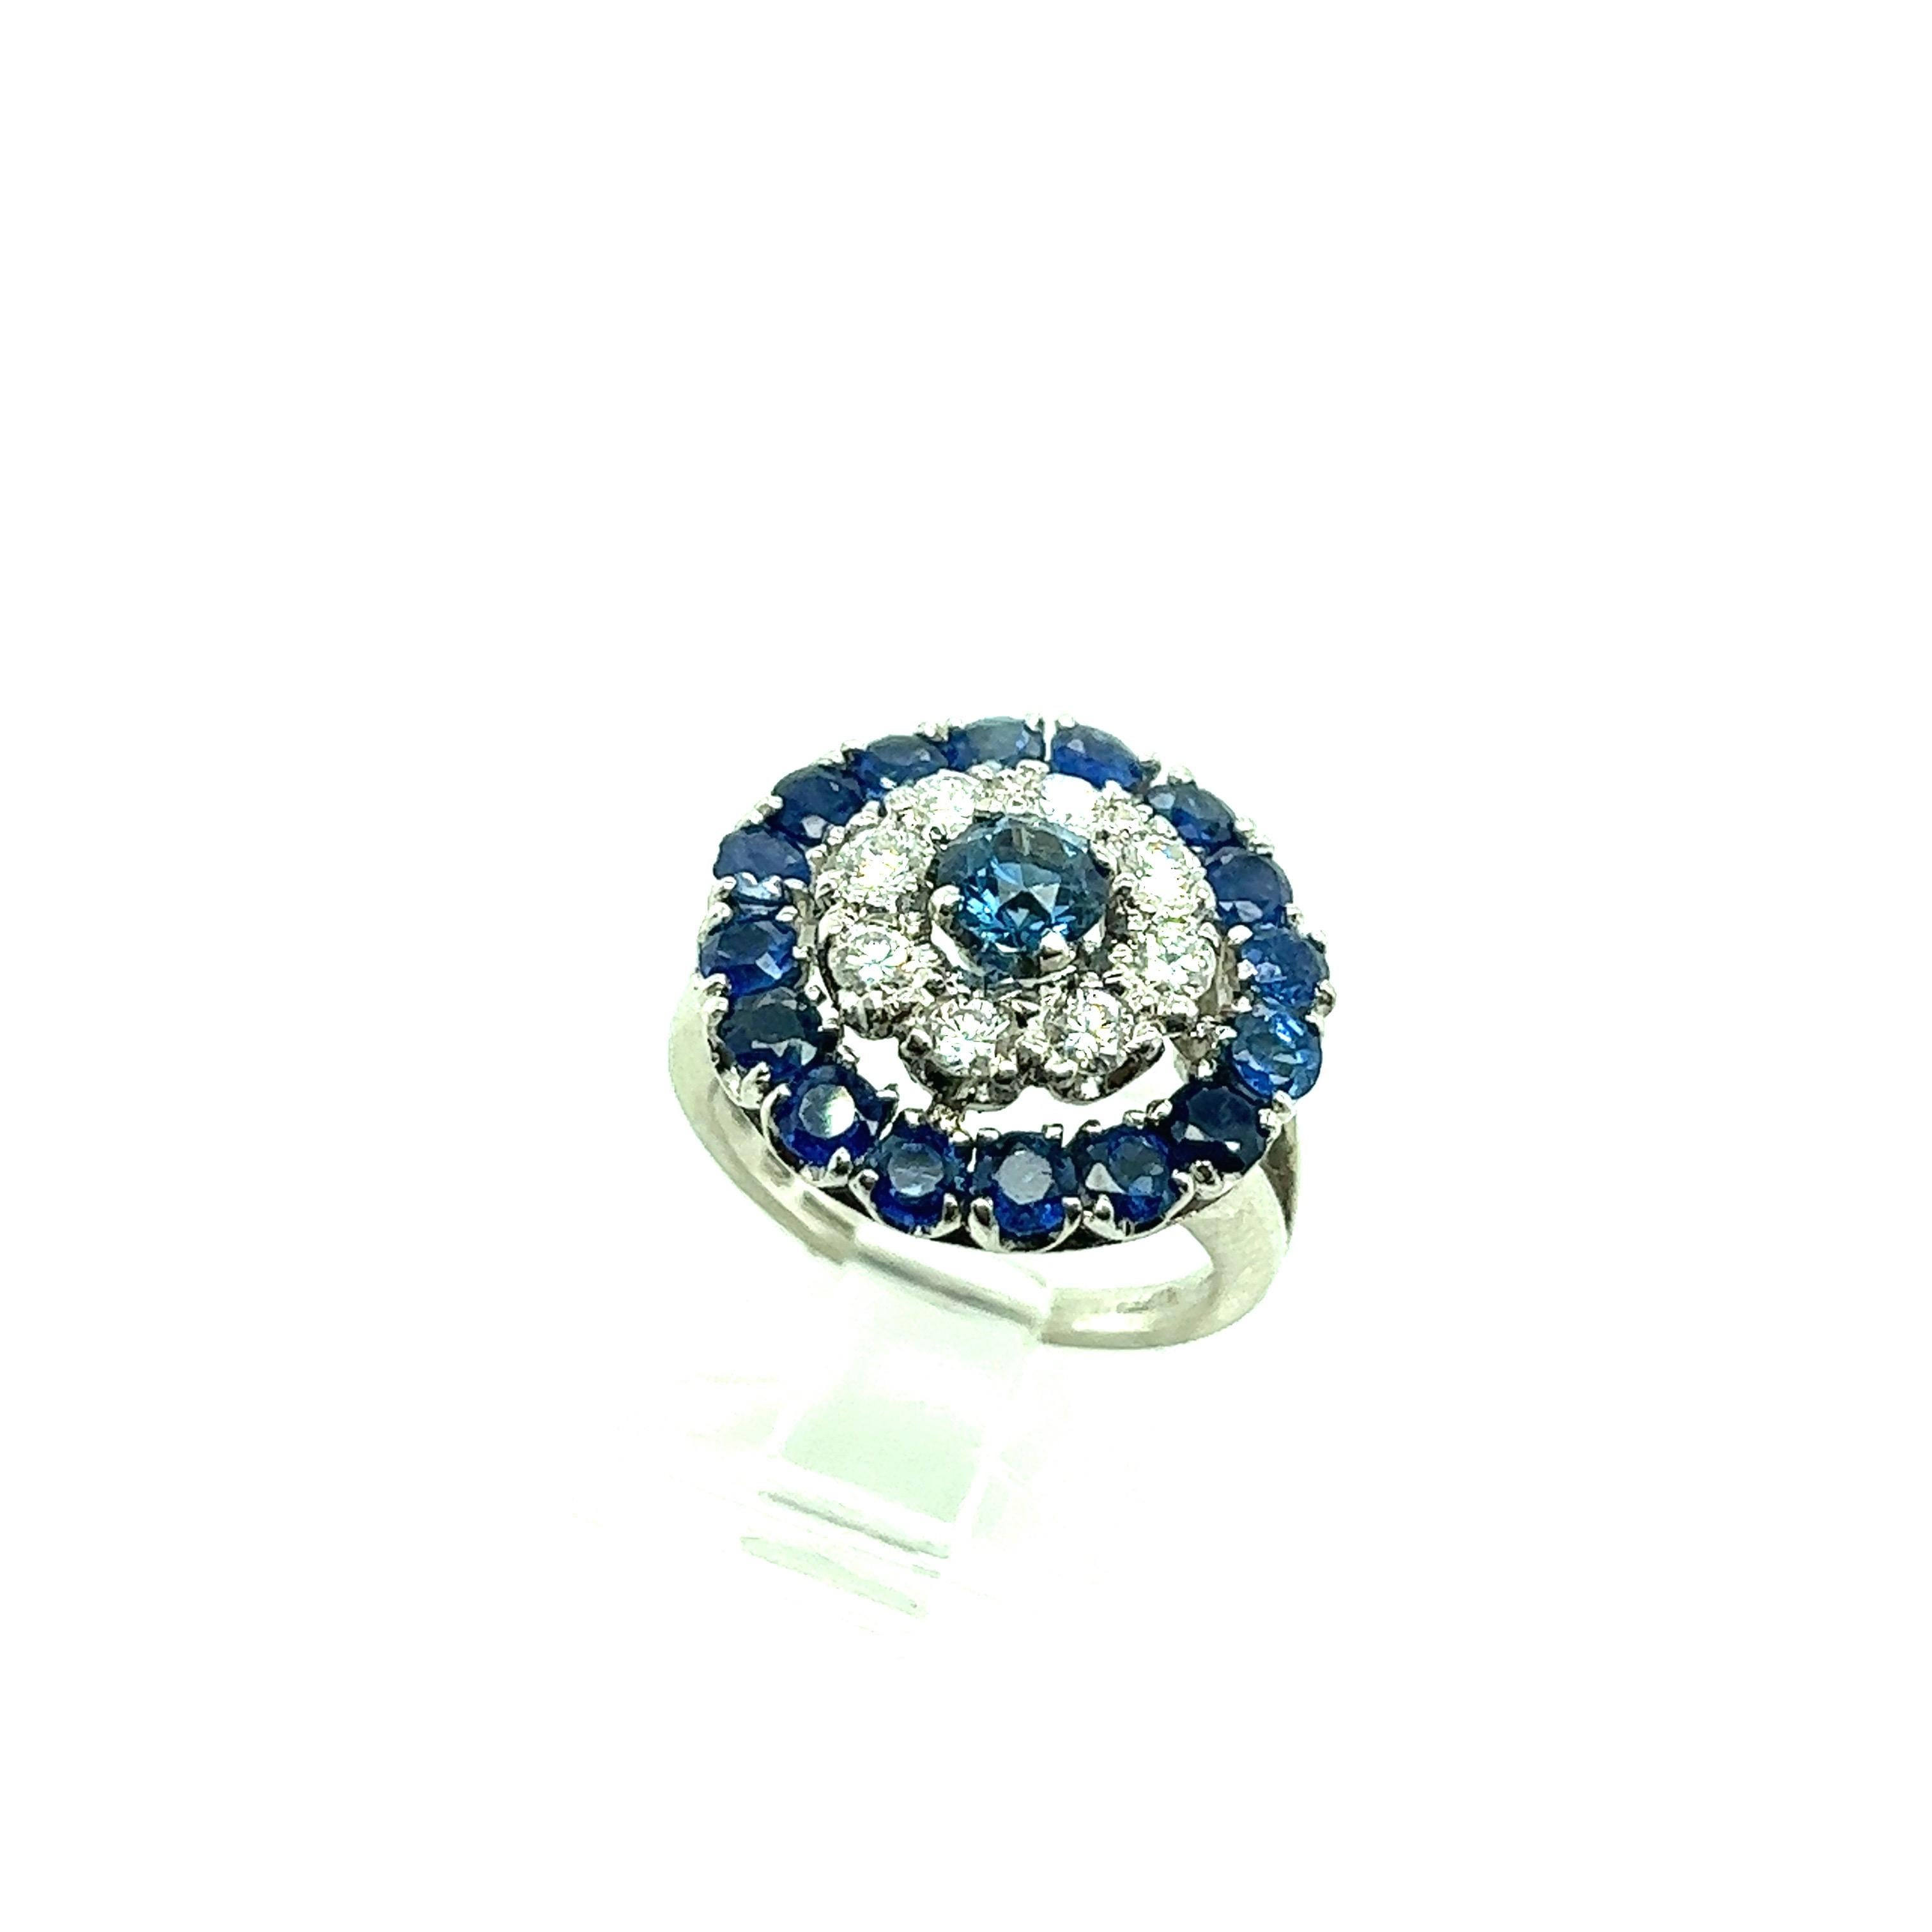 Tiffany & Co. ring with approximately 2.42 carats of sapphires and 0.64 carat of diamonds set on platinum. Marked: Tiffany / Plat. Total weight: 9.8 grams. Size 2.75. 